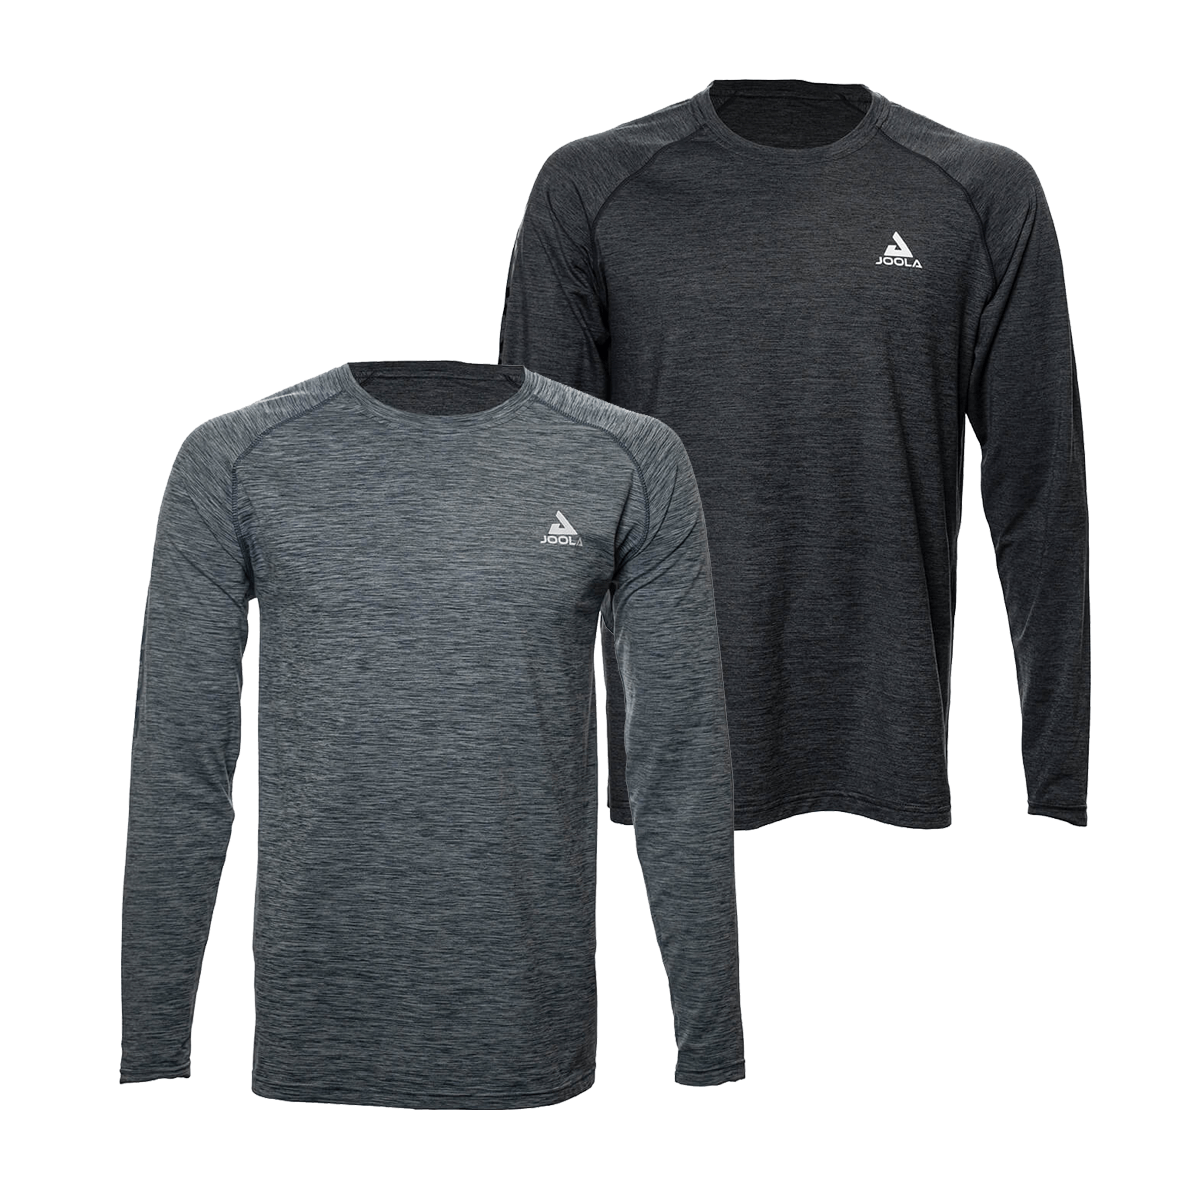 White Background Image: Long-sleeved JOOLA Ben Johns Motion crewneck shirt with white stacked JOOLA logo on upper left chest in Heather Gray (left) and Heather Charcoal (right).